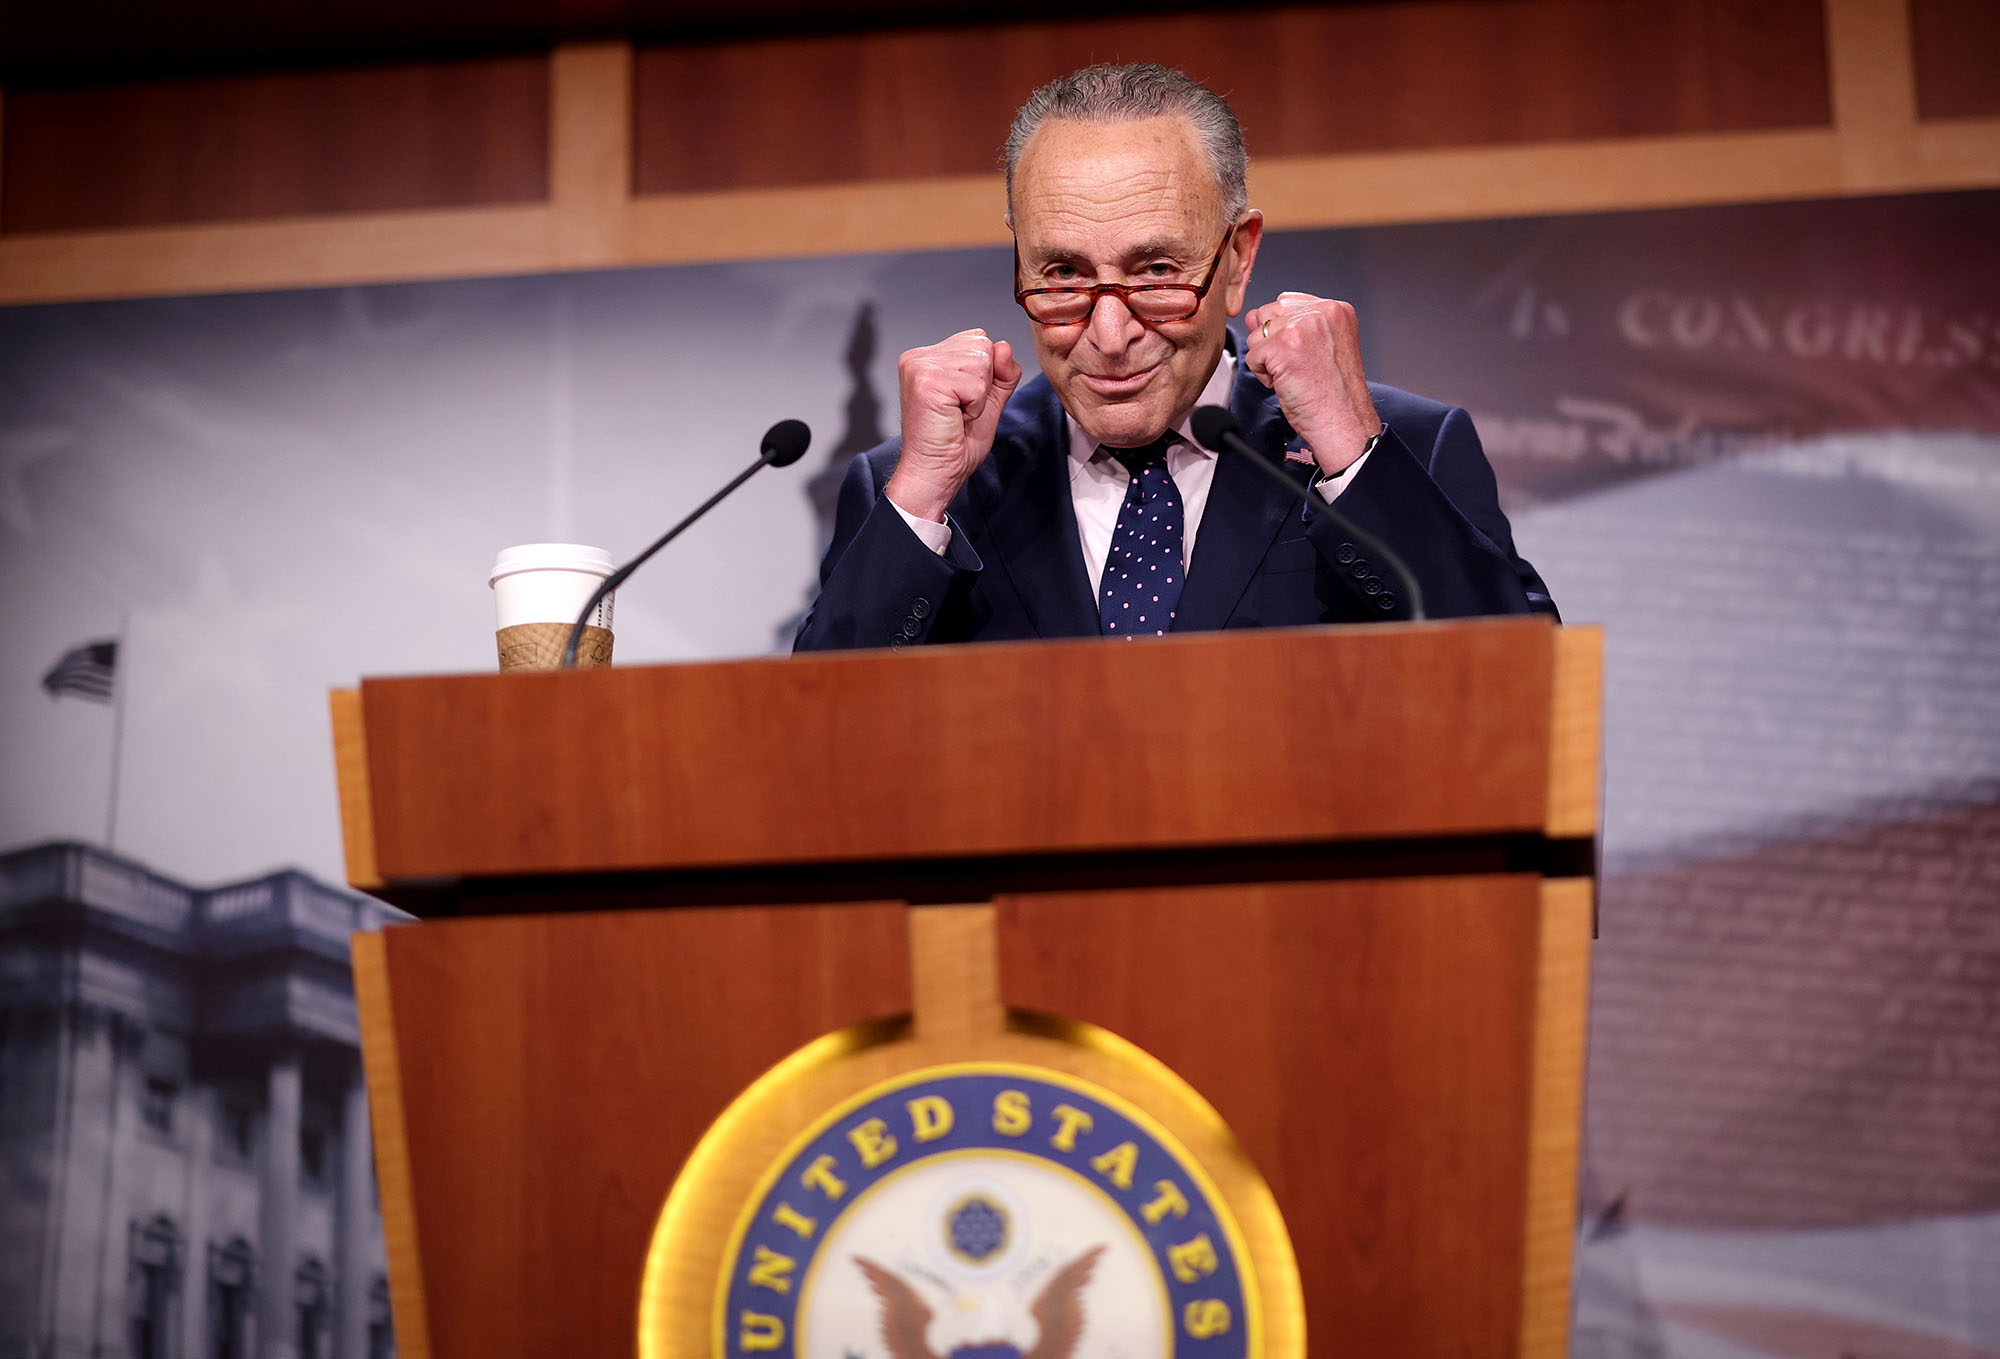 PHOTO: Senate Majority Leader Charles Schumer speaks on the passage of the bipartisan infrastructure bill, during a news conference in Washington, Aug. 11, 2021.